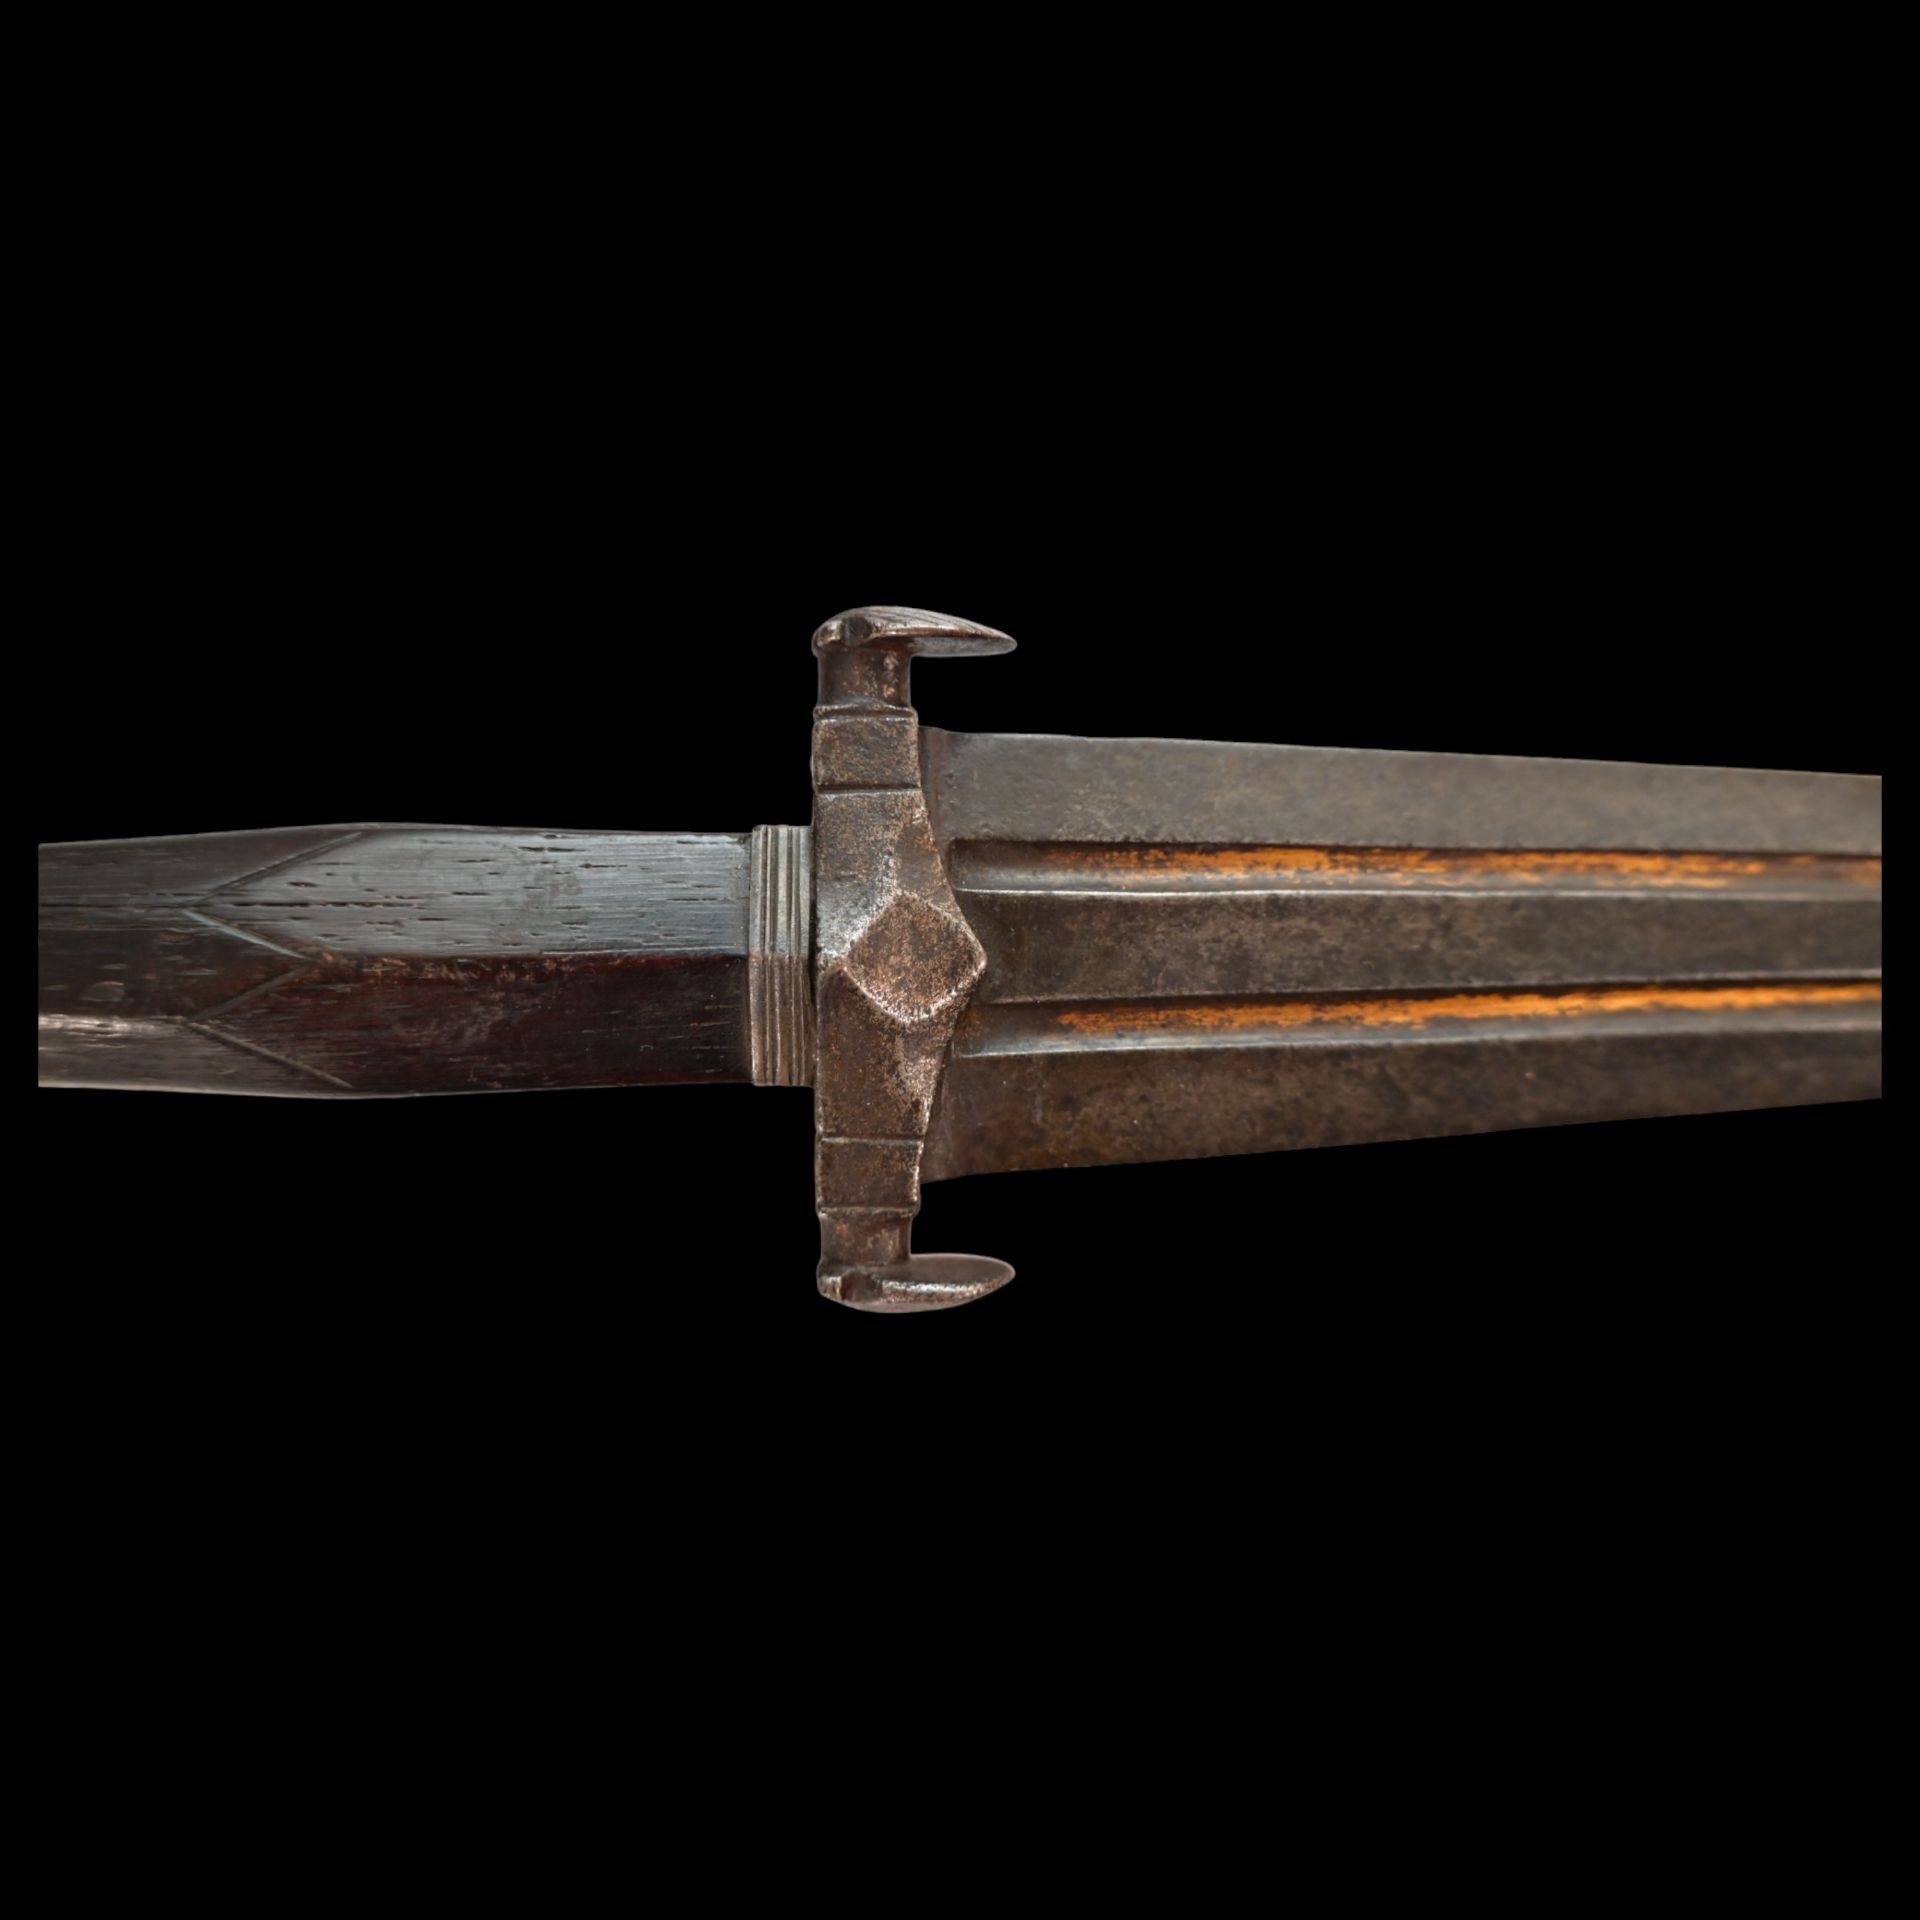 Very rare medieval dagger in excellent condition, France, 15th-16th century. - Image 10 of 11